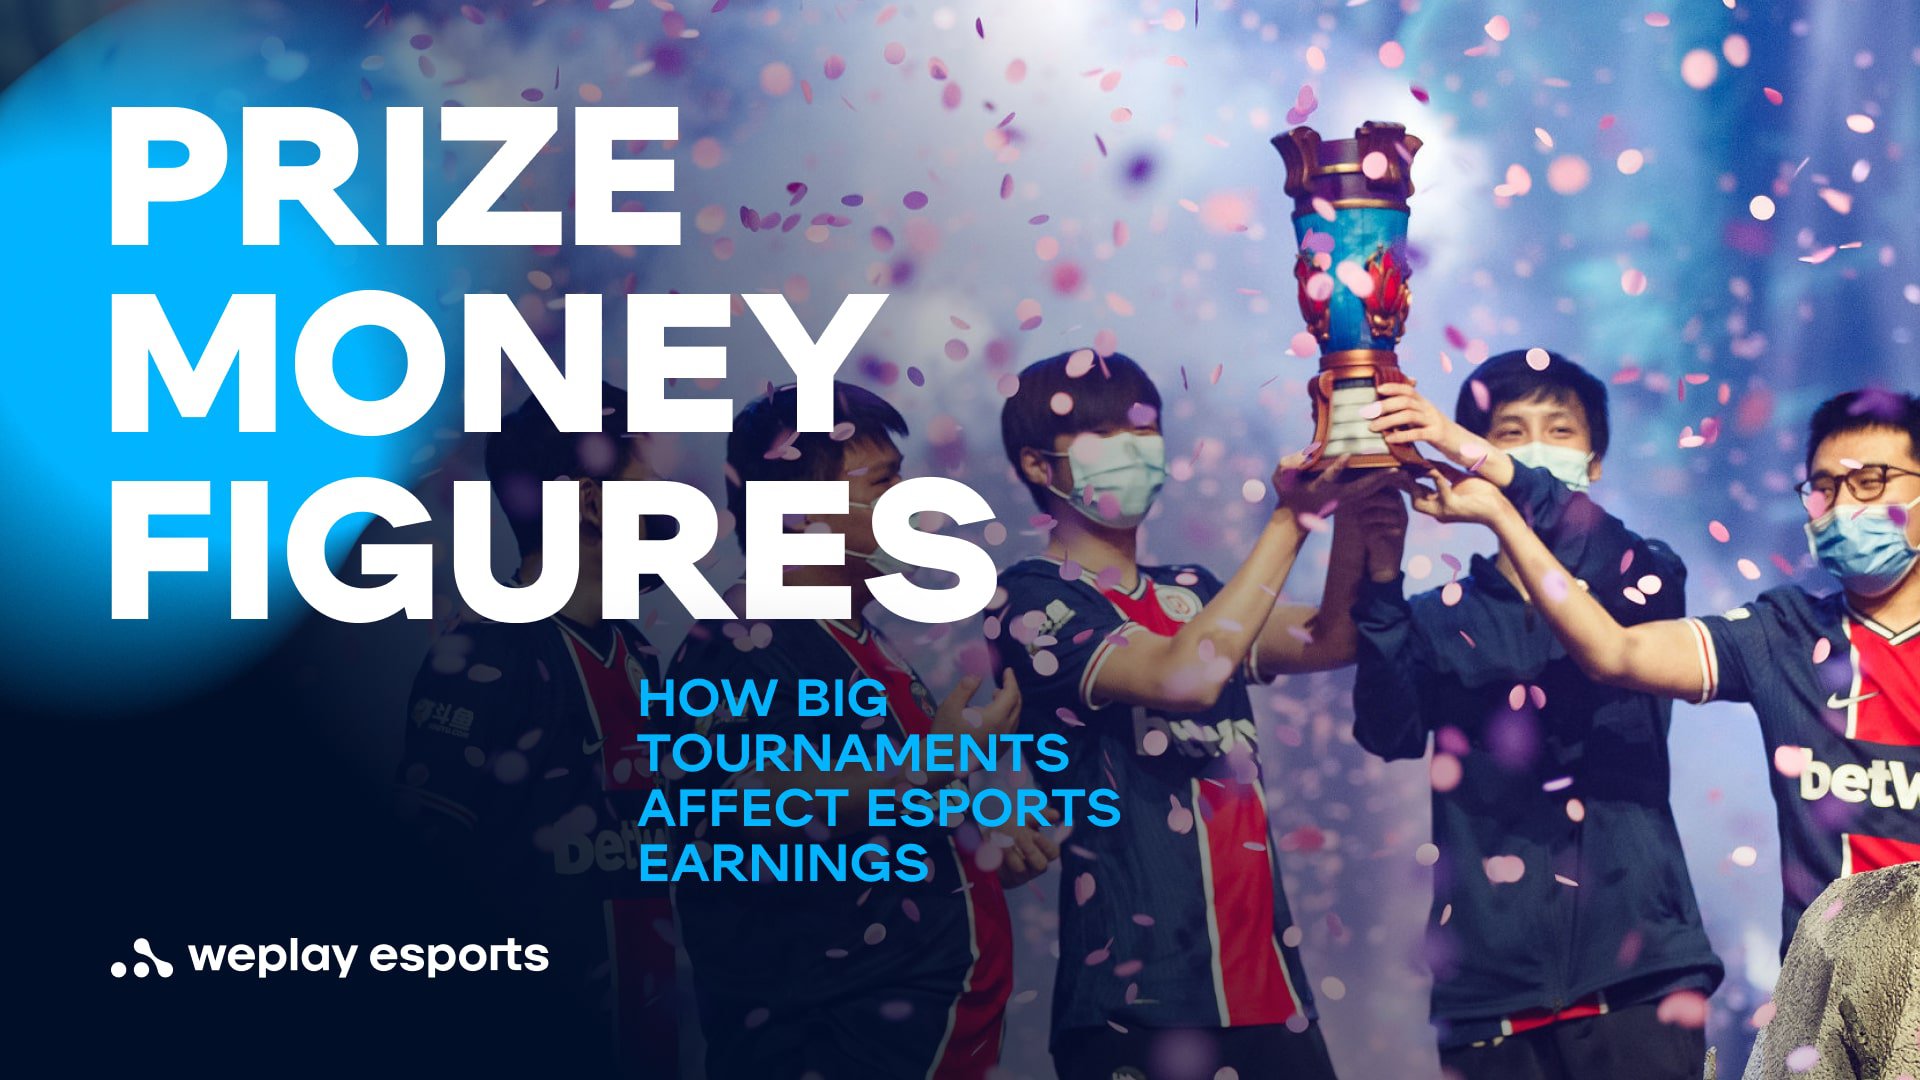 Prize money figures into esports. Credit: WePlay Holding